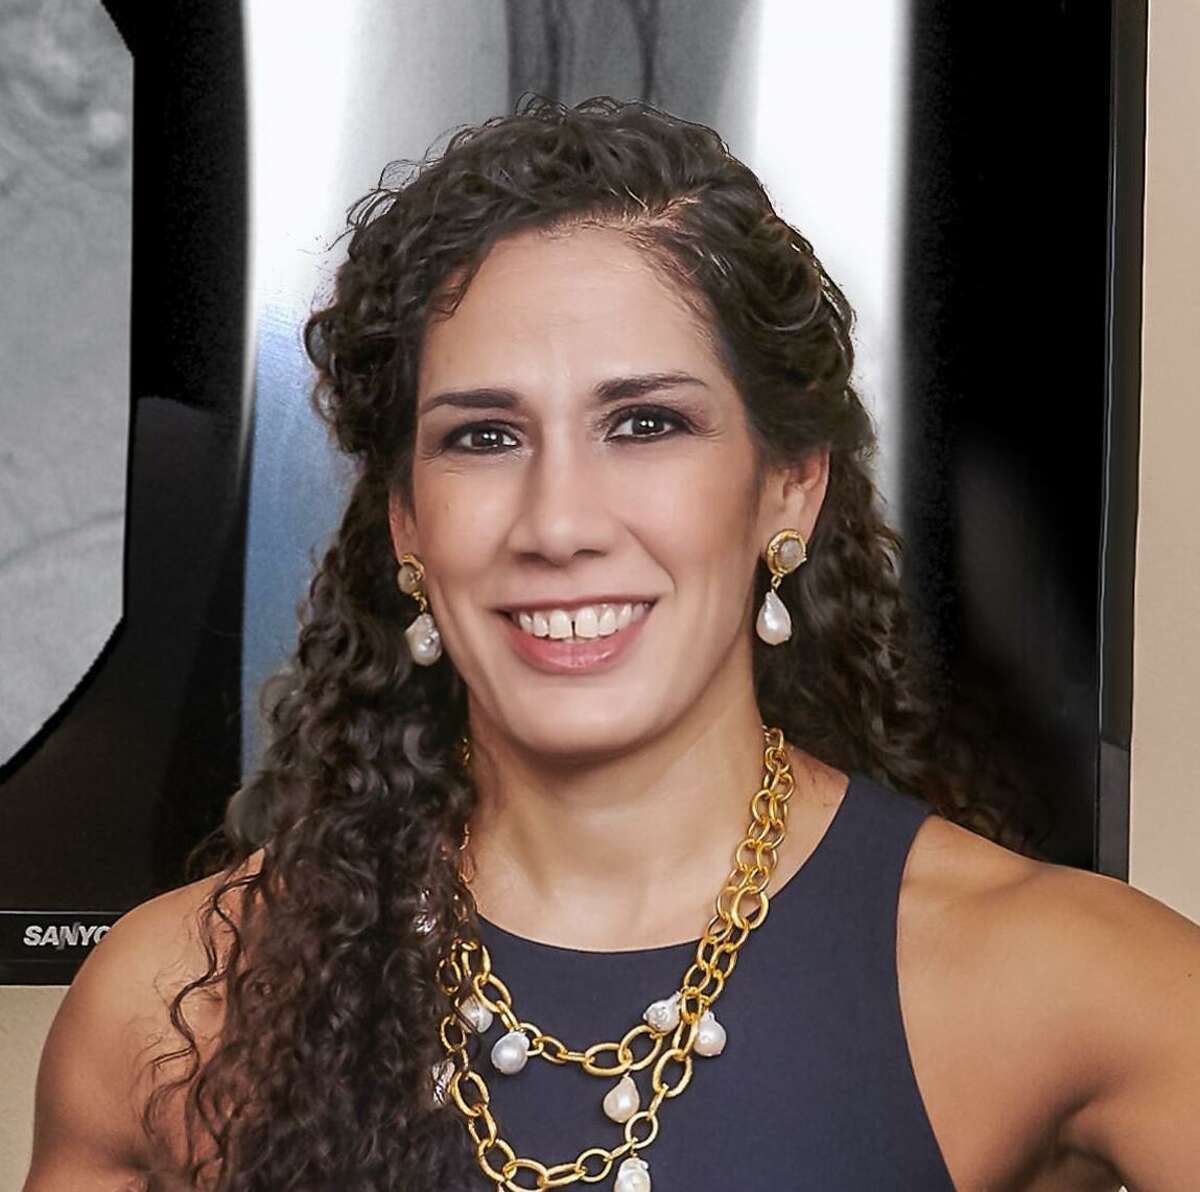 Dr. Lyssa Ochoa is founder and CEO of San Antonio Vascular and Endovascular Clinic, which is building a 10,500-square-foot surgery center on the South Side.